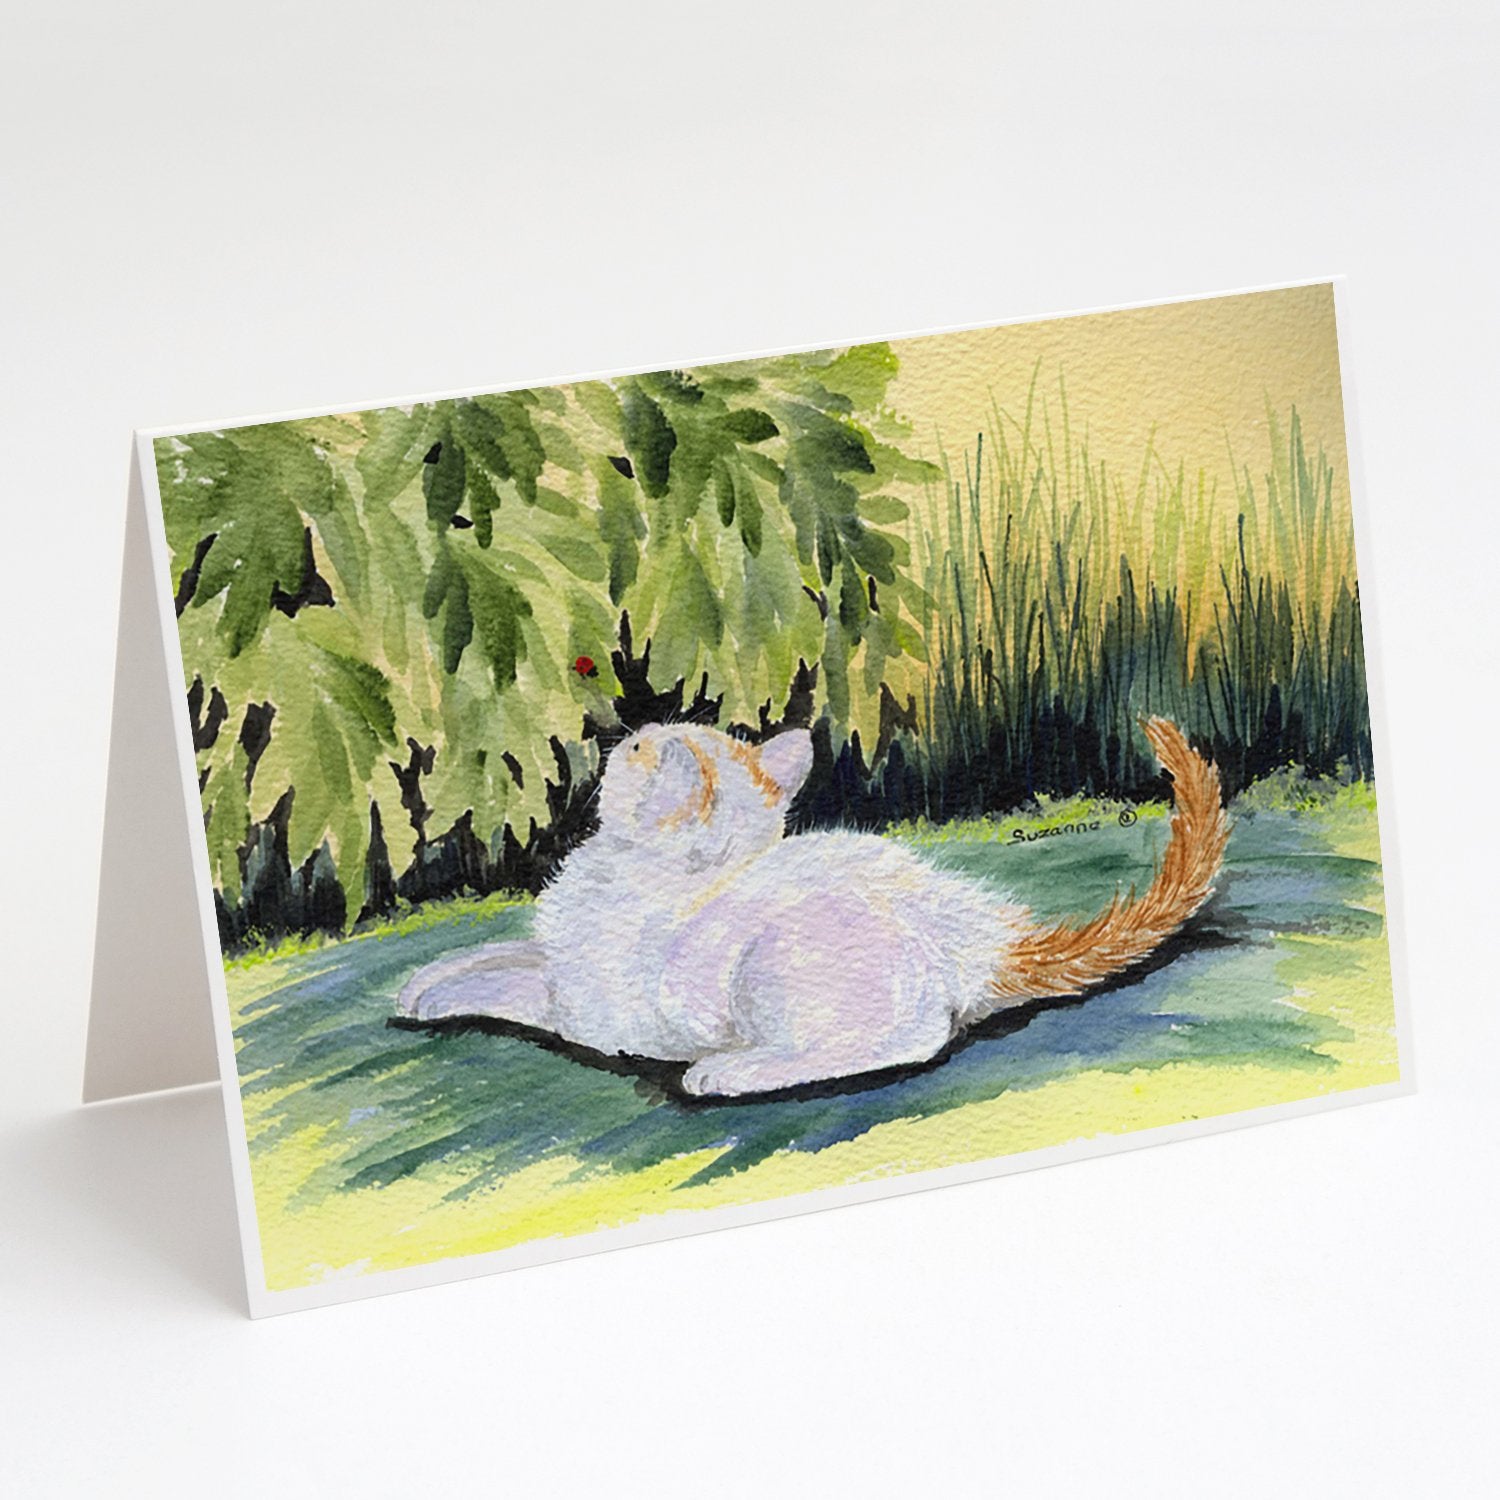 Buy this Cat Greeting Cards and Envelopes Pack of 8